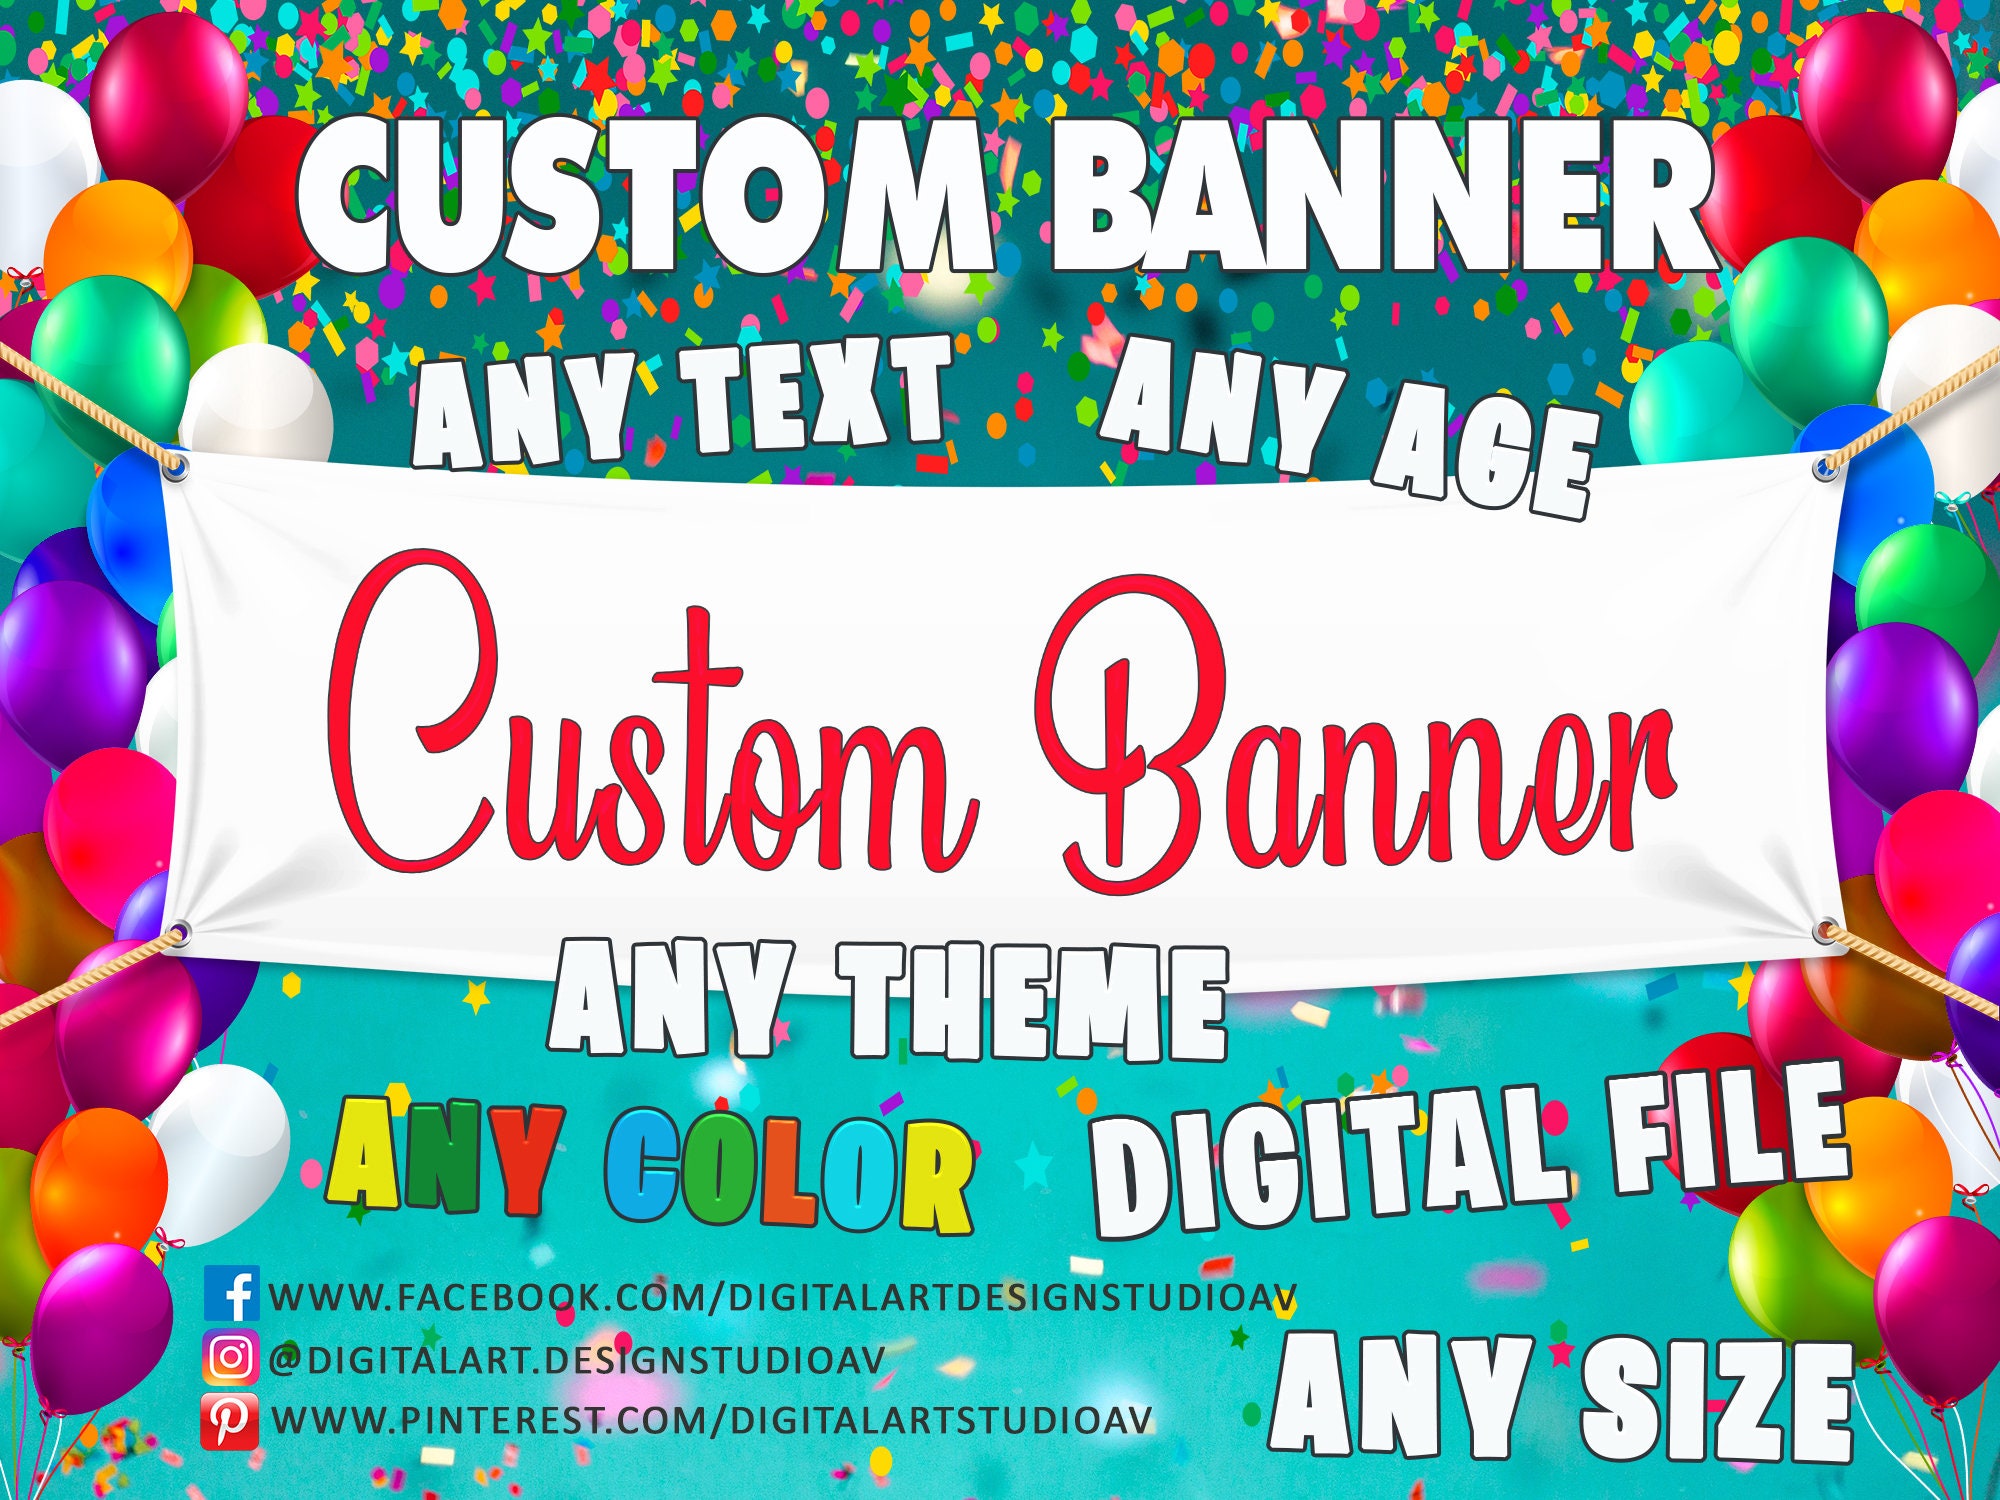 personalized banners